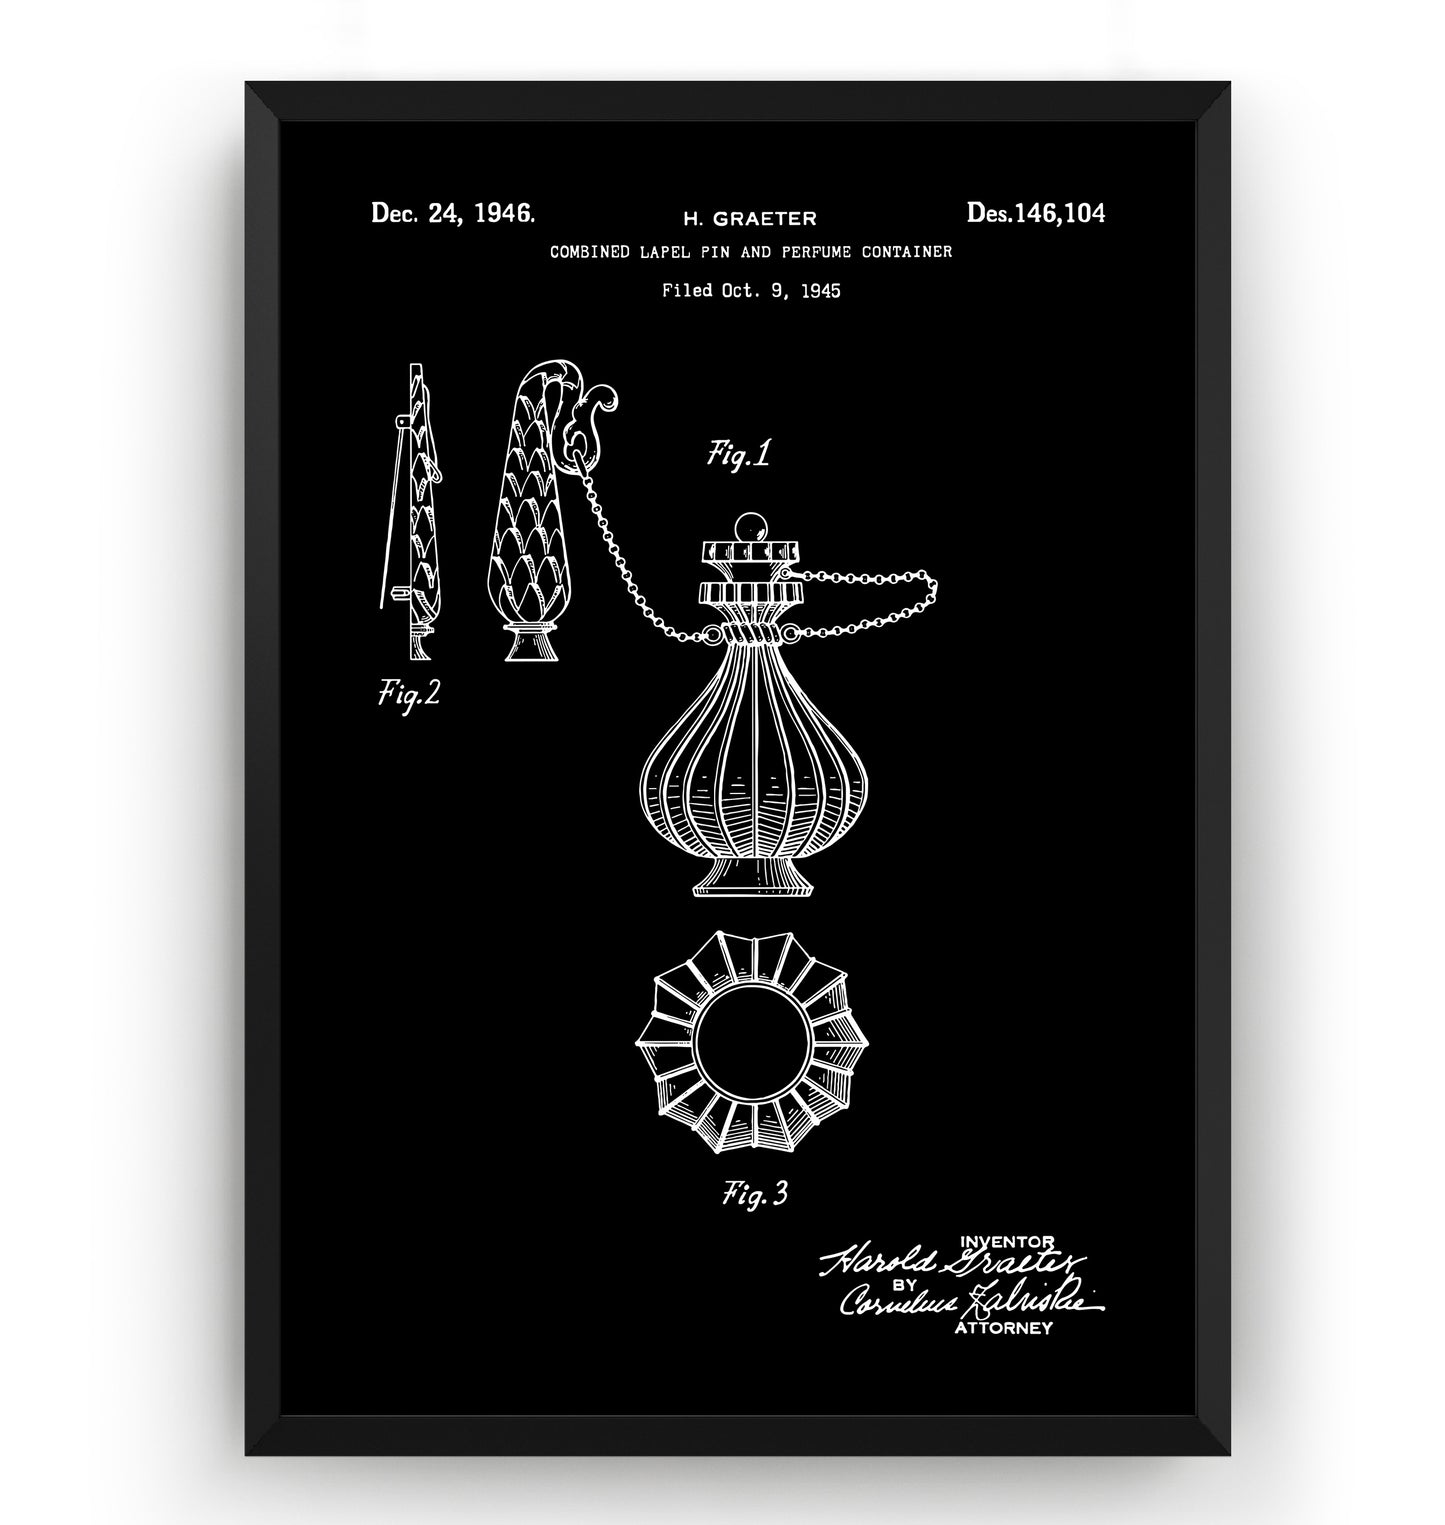 Perfume Container 1946 Patent Print - Magic Posters